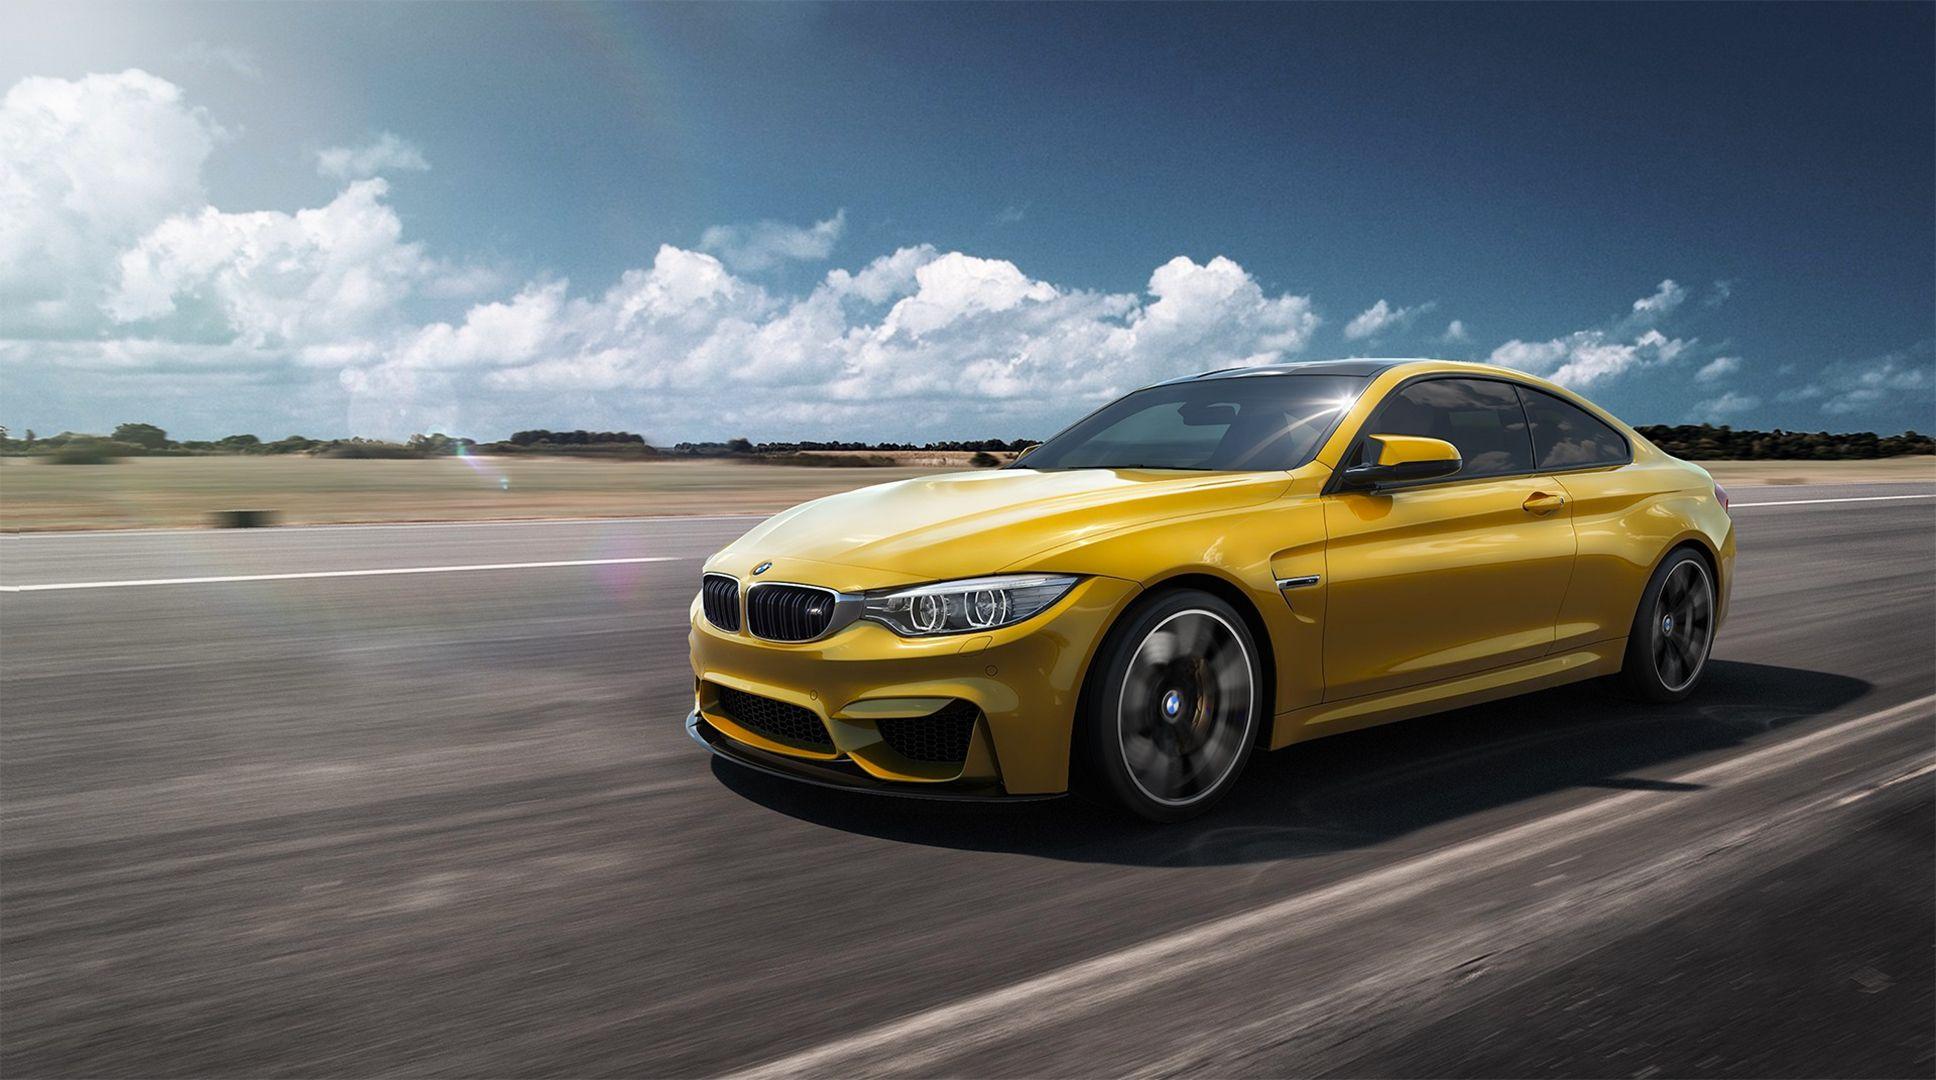 BMW M4 Wallpaper, Picture, Image